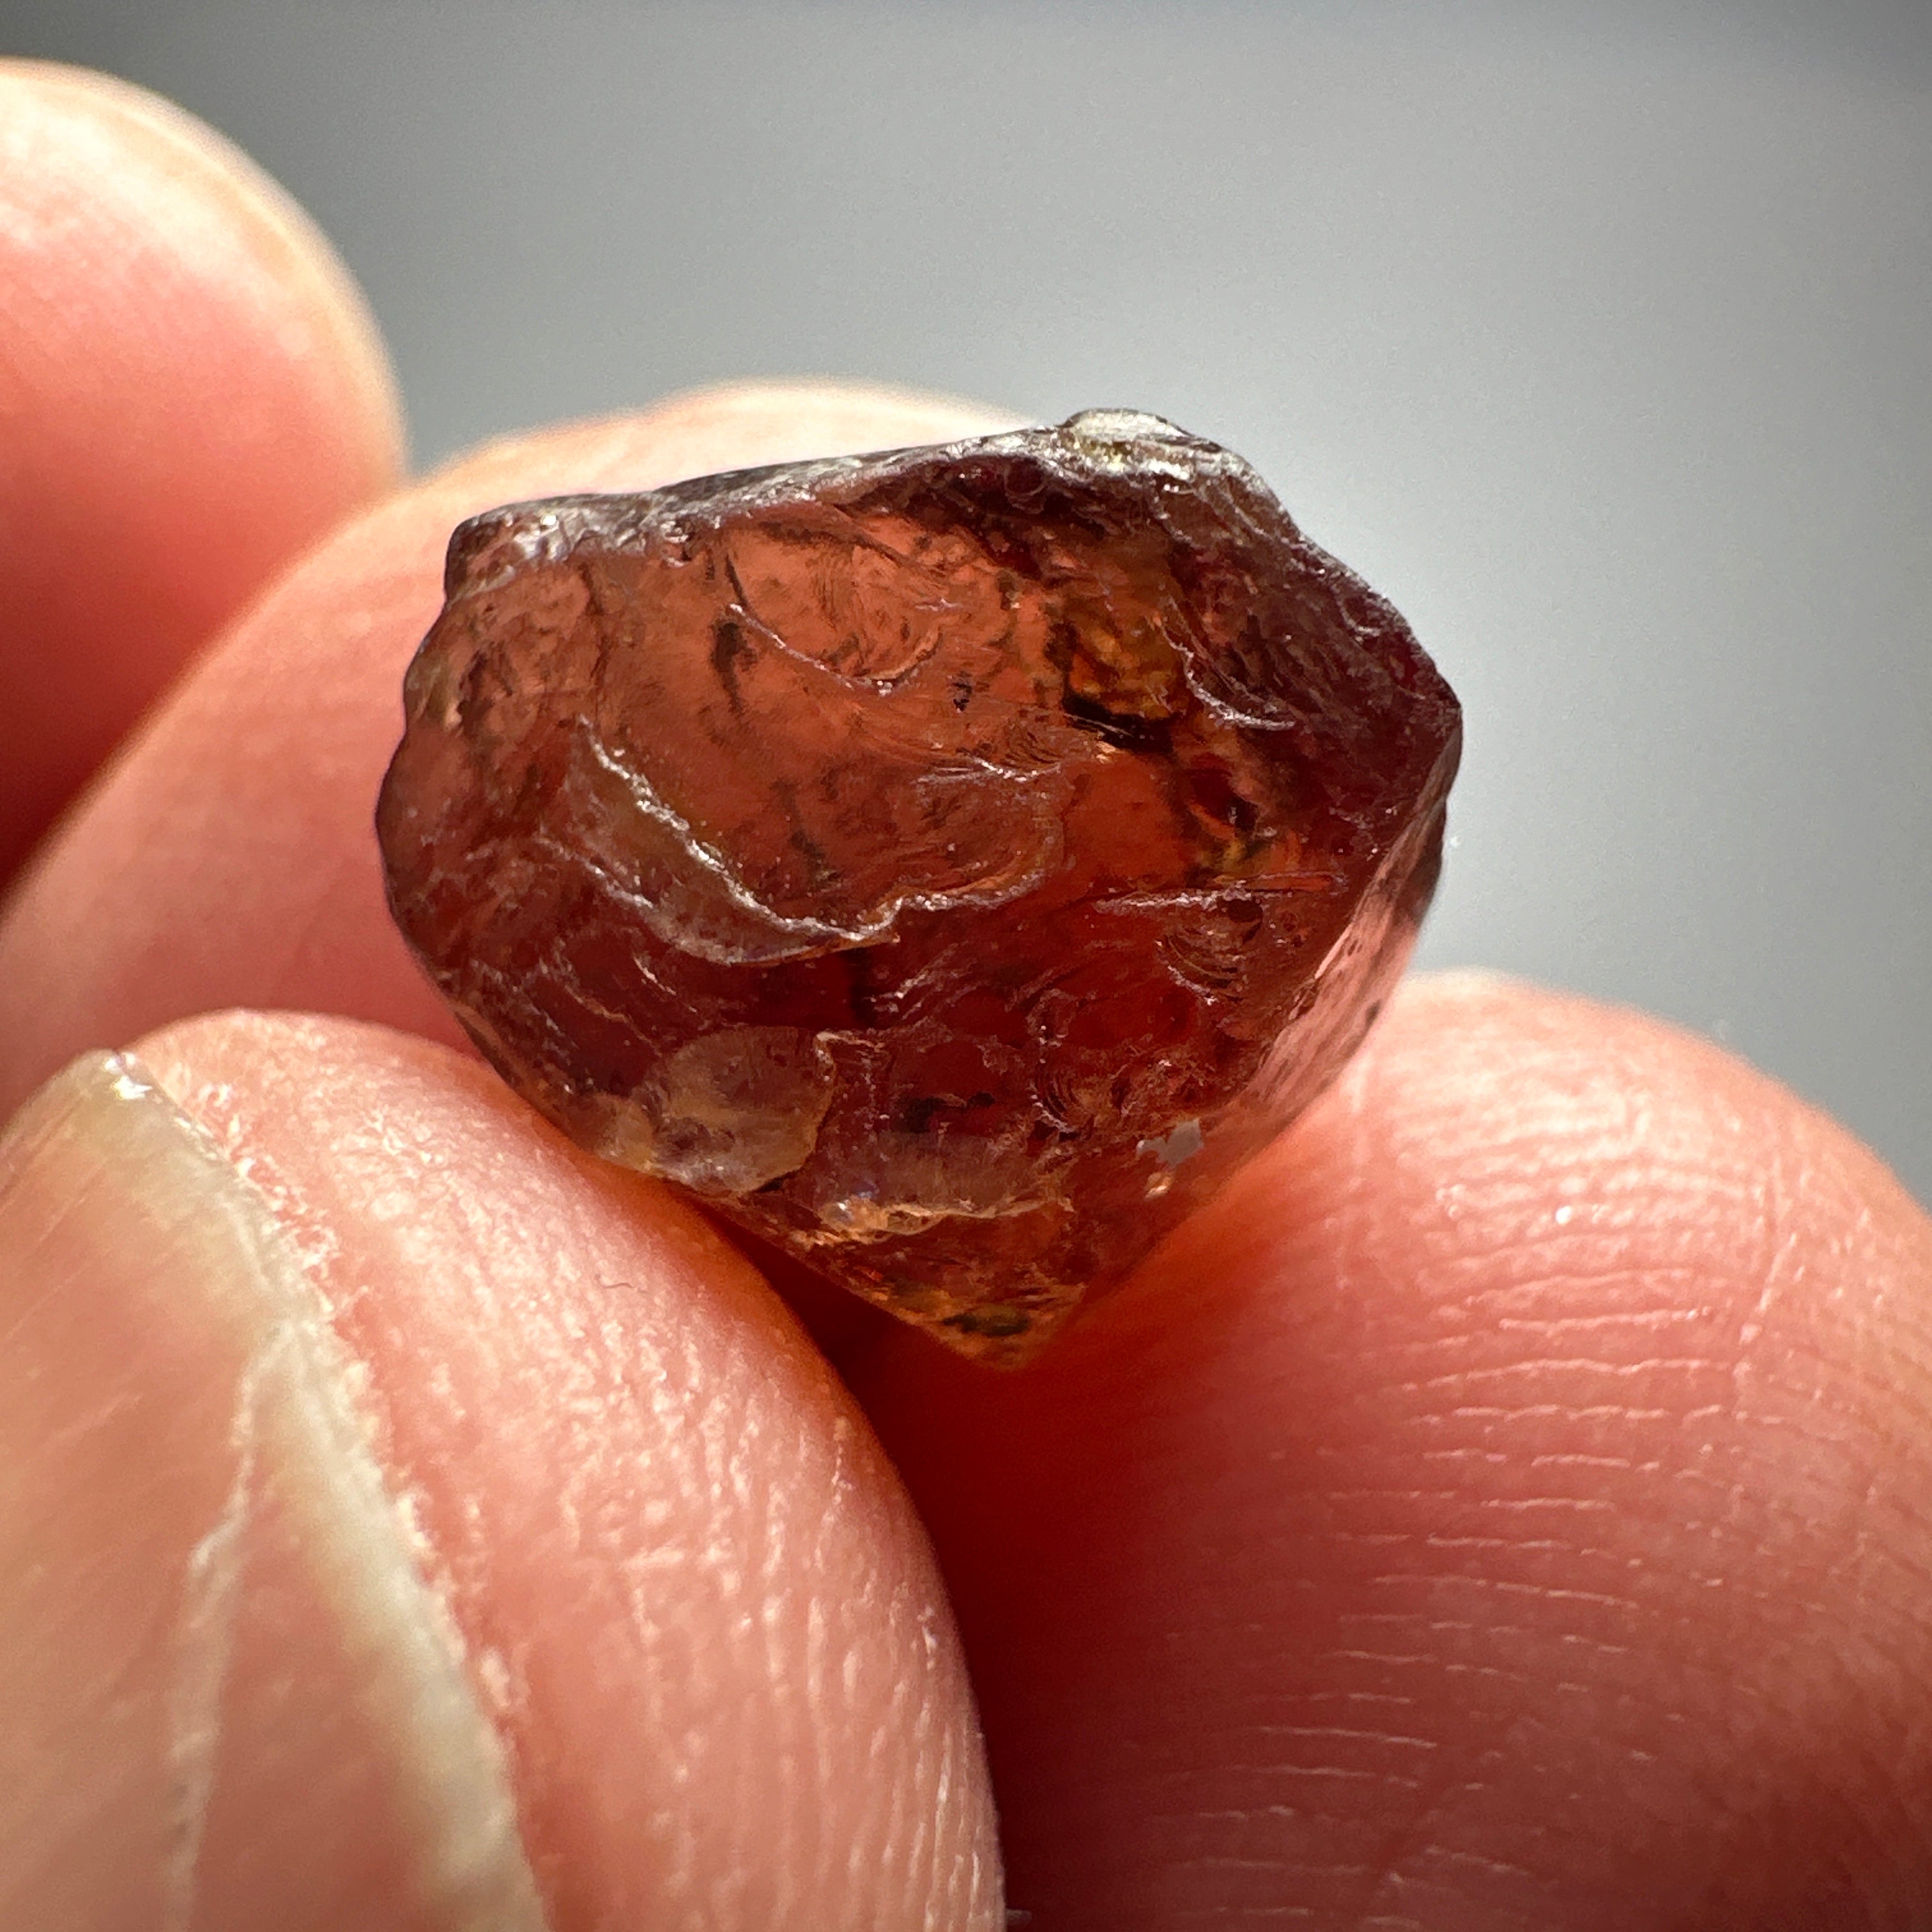 5.97ct Colour Change Garnet, Tanzania, Untreated Unheated, no inclusions just a slight spray of white spots